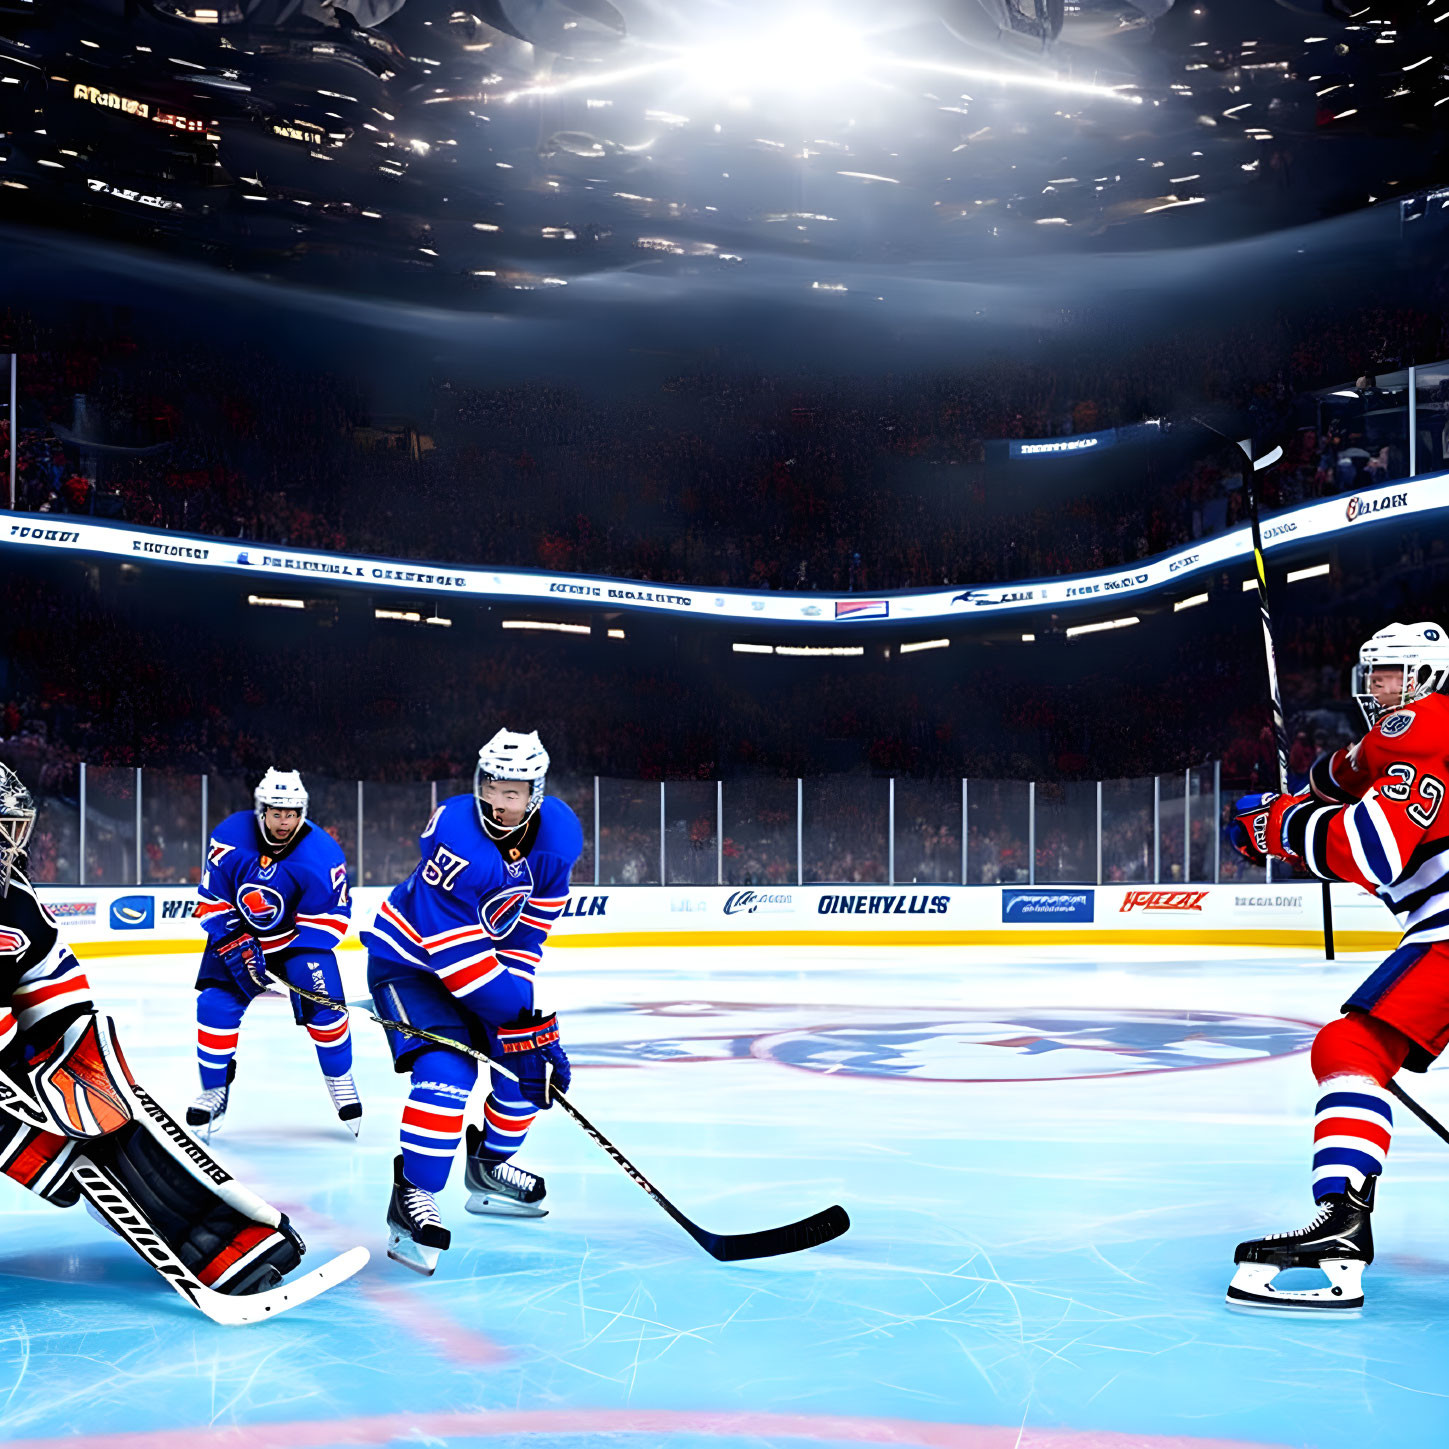 Ice Hockey Match: Players in Blue and Red Jerseys, Spectators in Stands